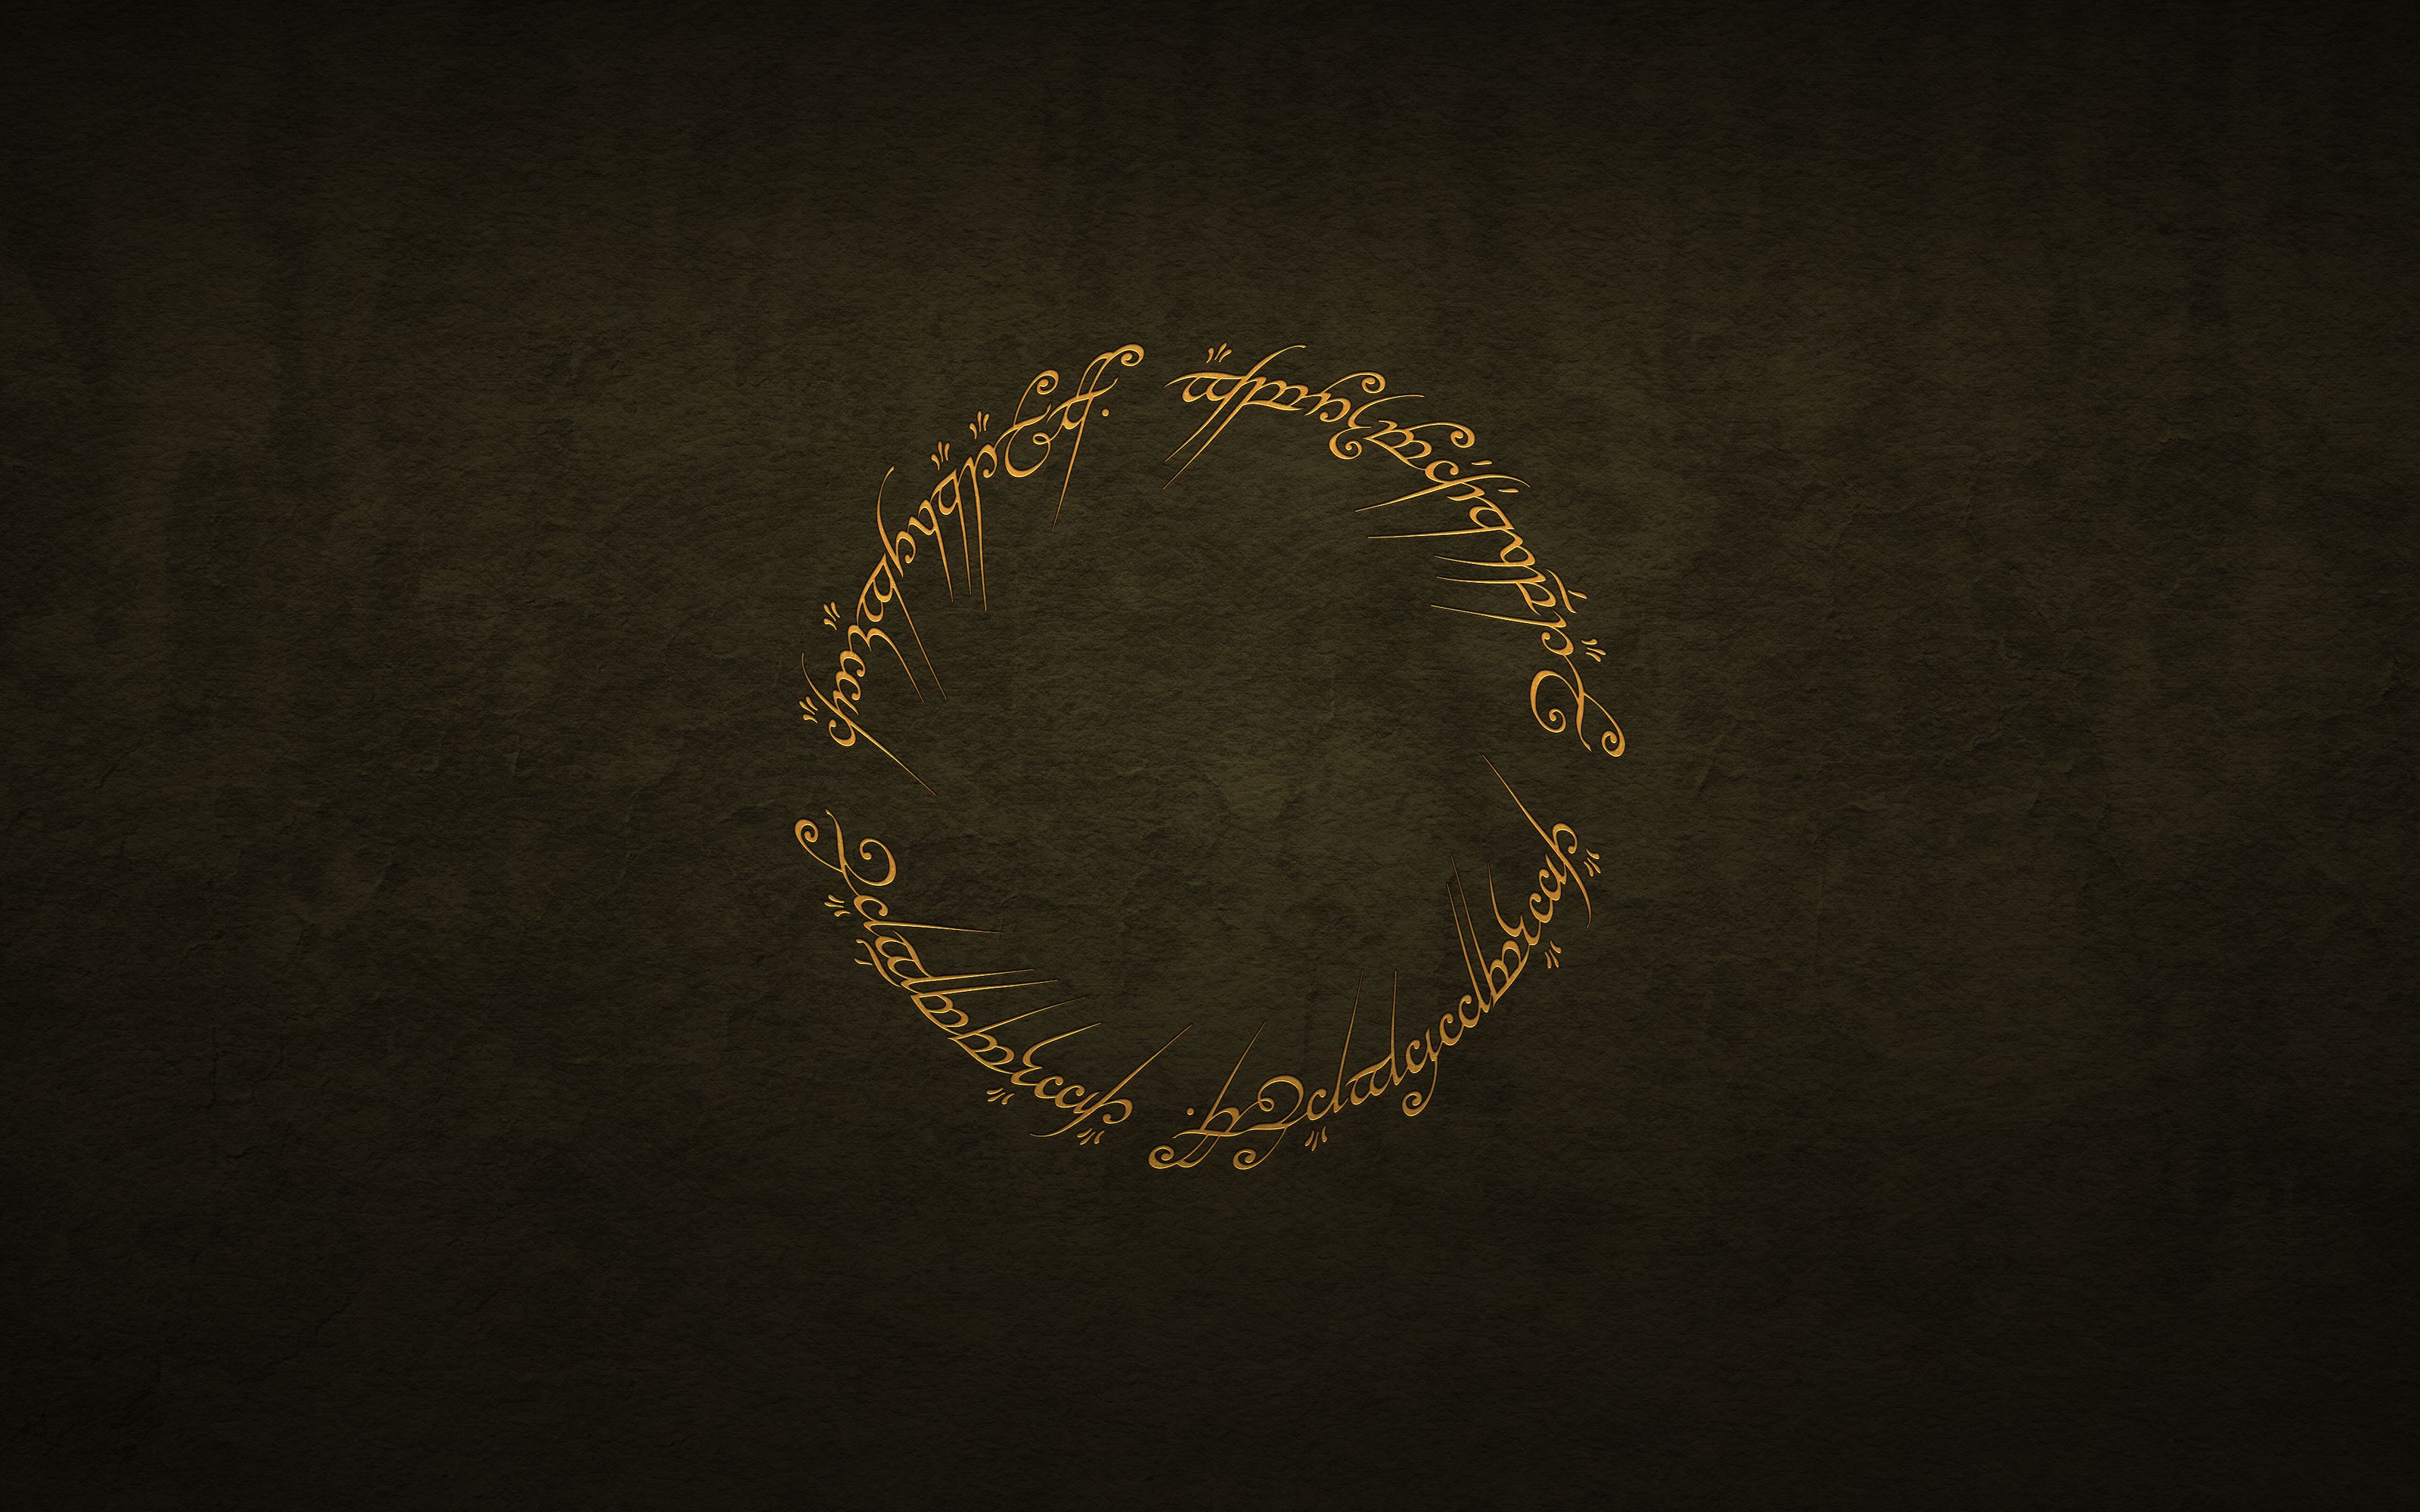 The Ring Wallpaper